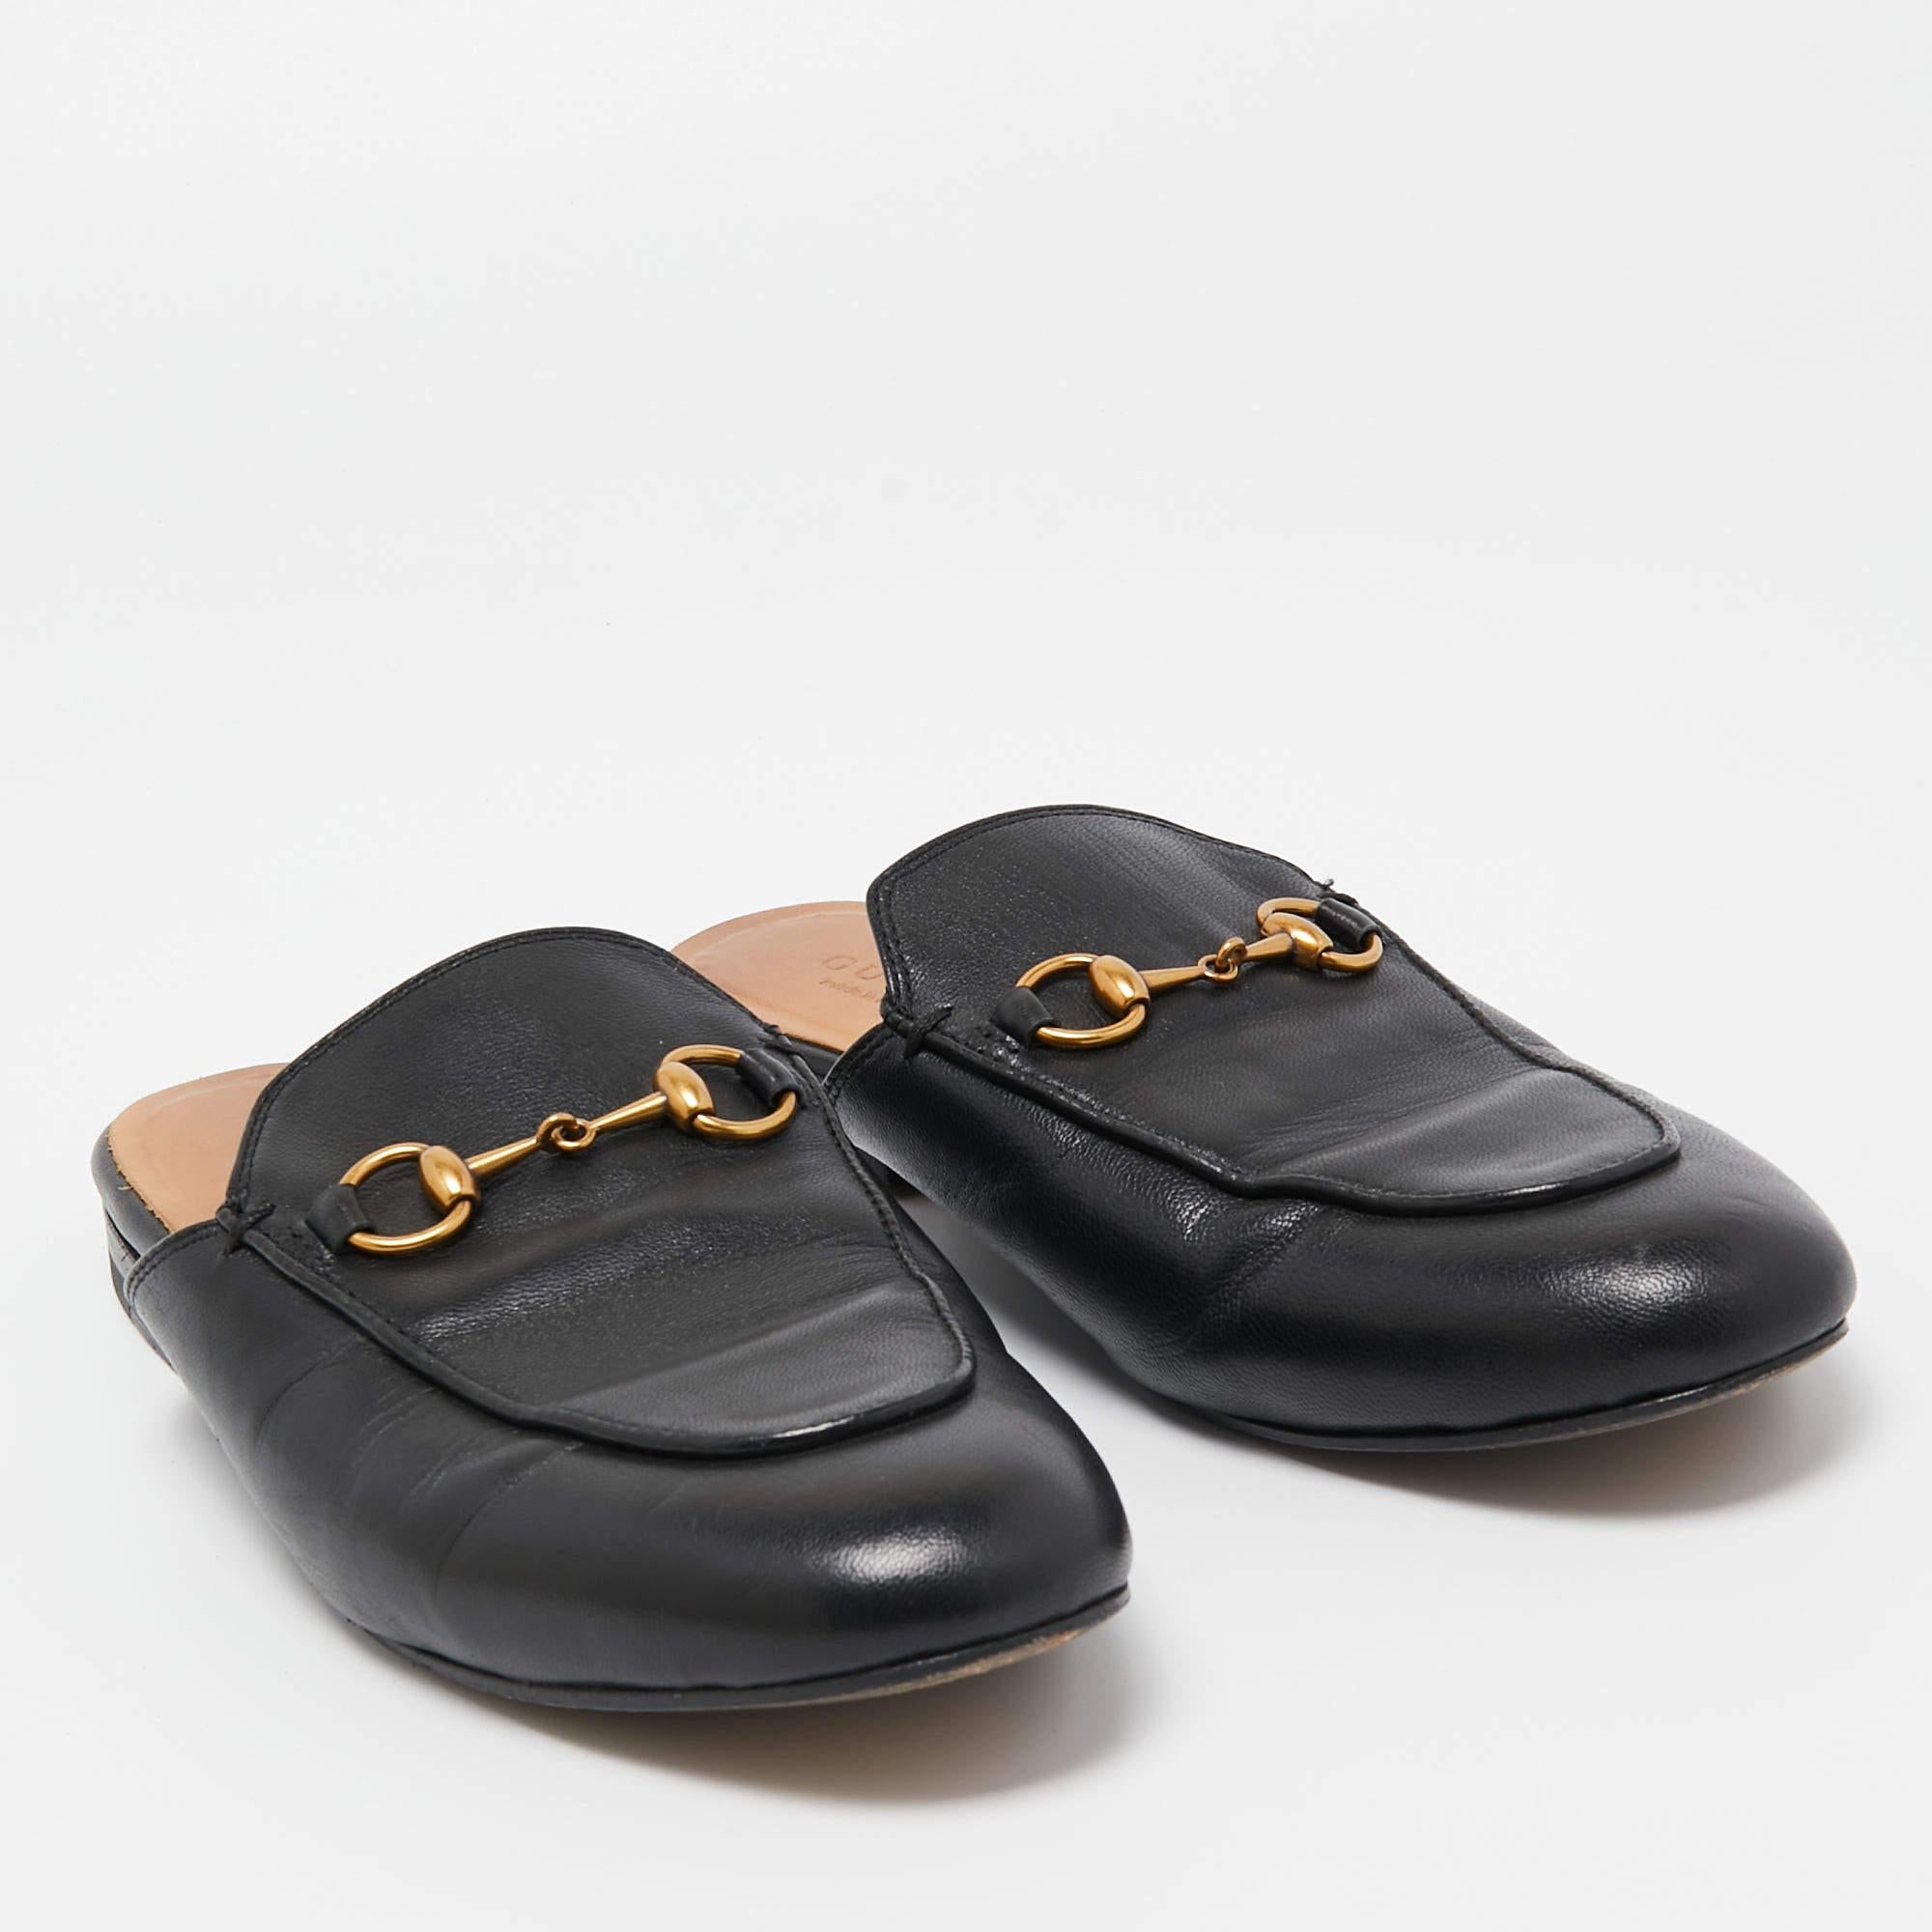 Women's Gucci Black Leather Princetown Mules Size 36